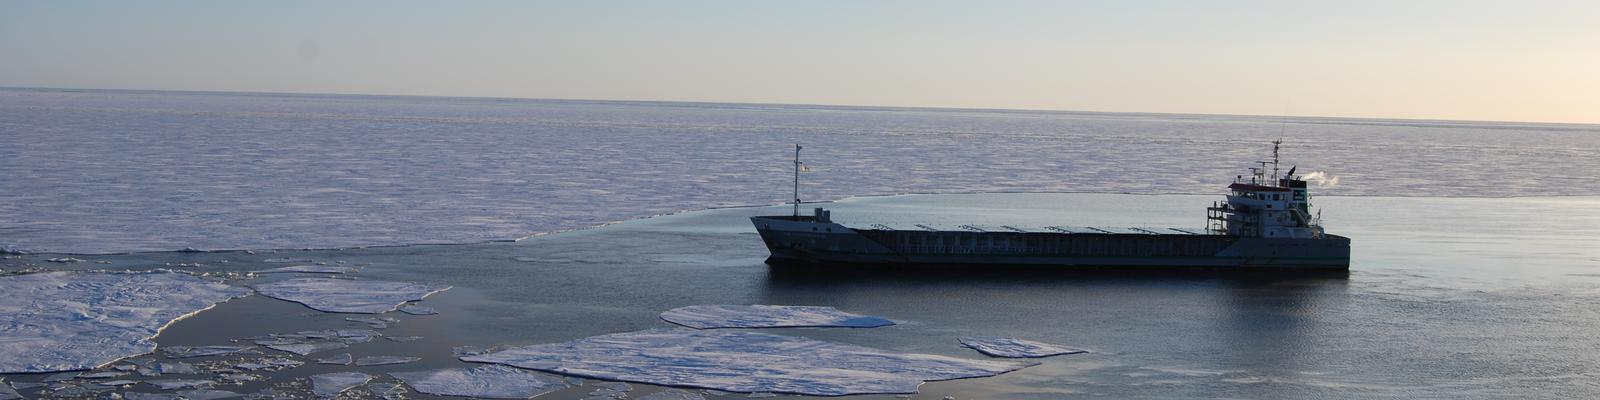 Cargo ships on the high seas during the winter